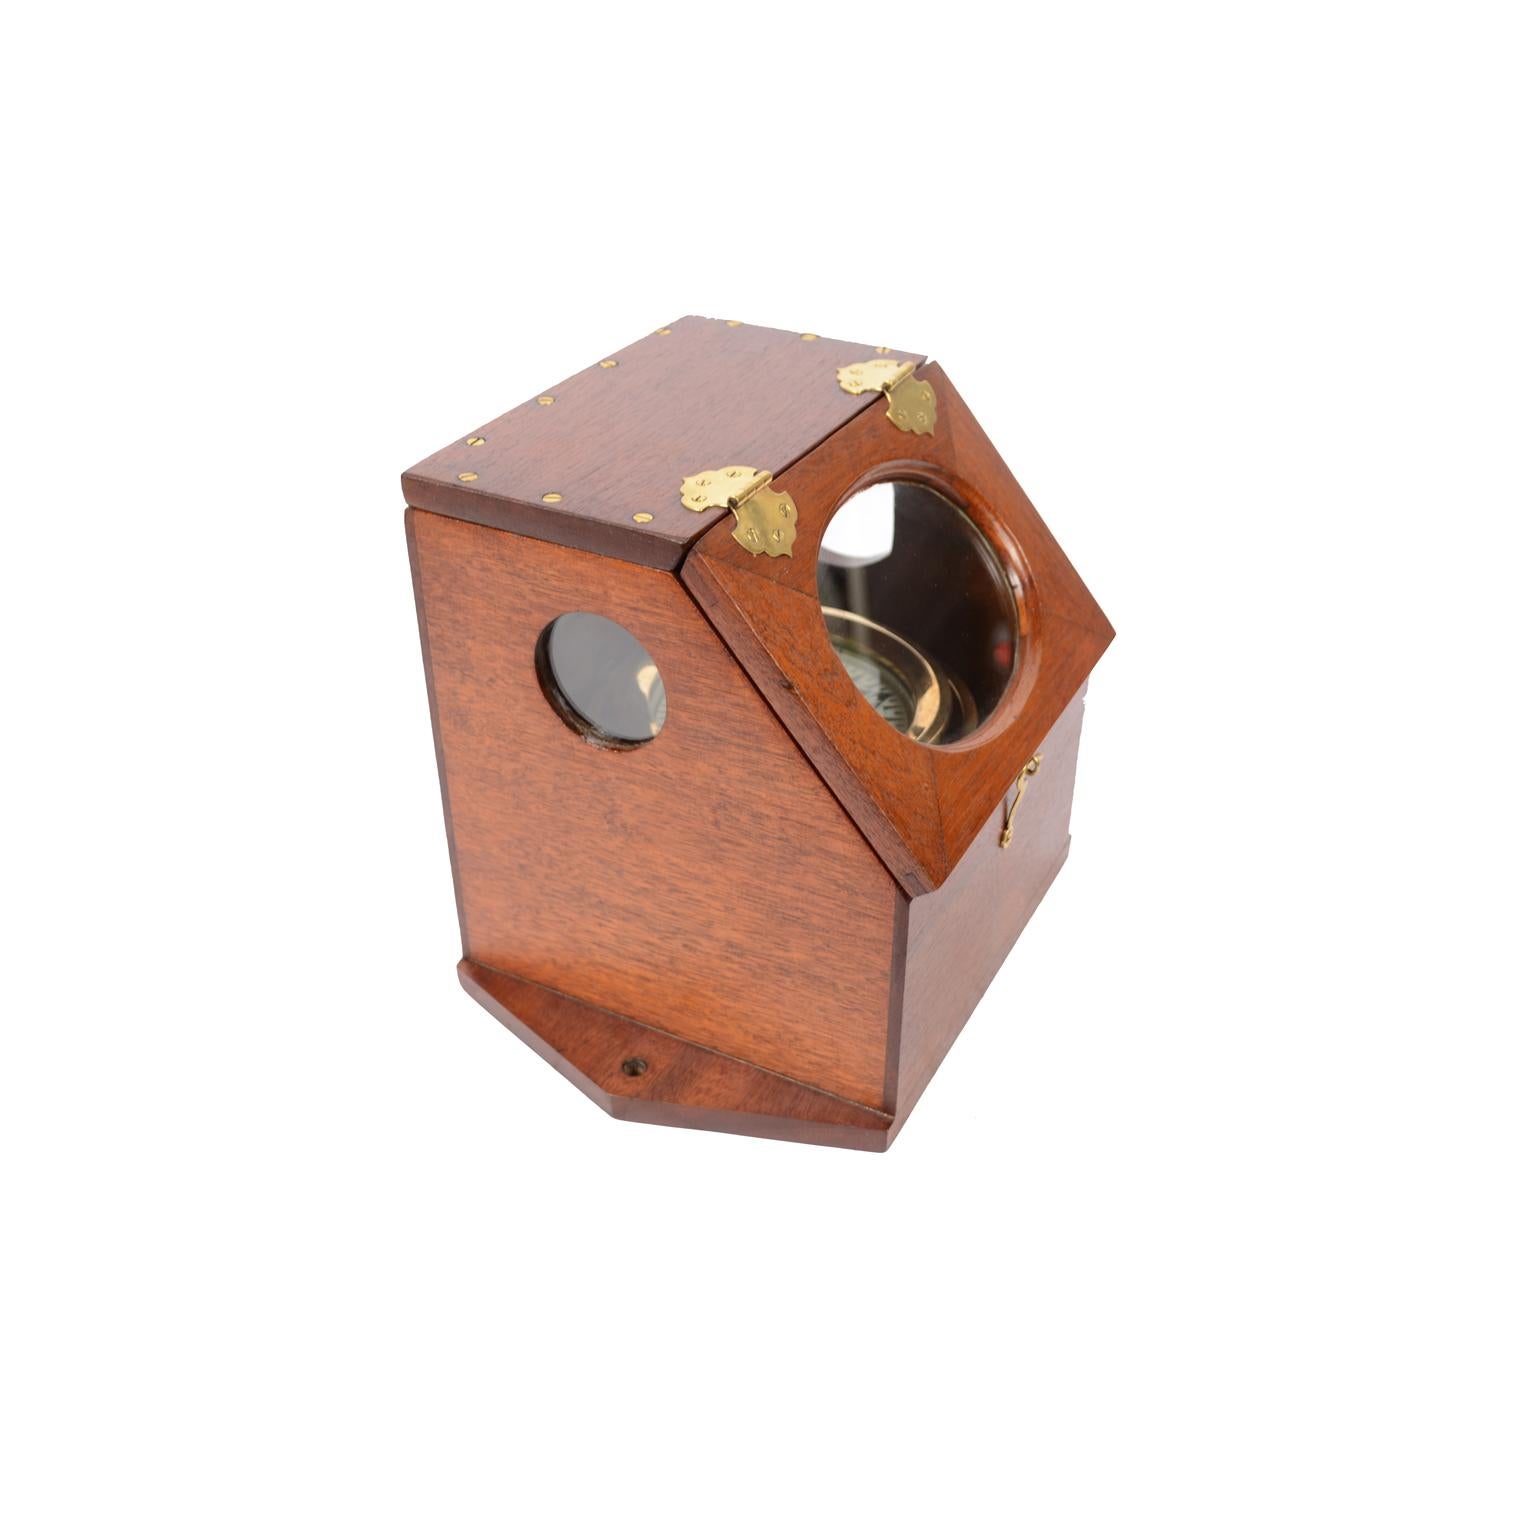 Rare mahogany wood binnacle compass. Inside there is a liquid compass mounted on a universal joint signed D. Baker Melrose Mass Pat. 22 Sept 1896 and marketed by the Chas Company. C. Hutchinson Agent 152 State St Boston. Good condition, the light is